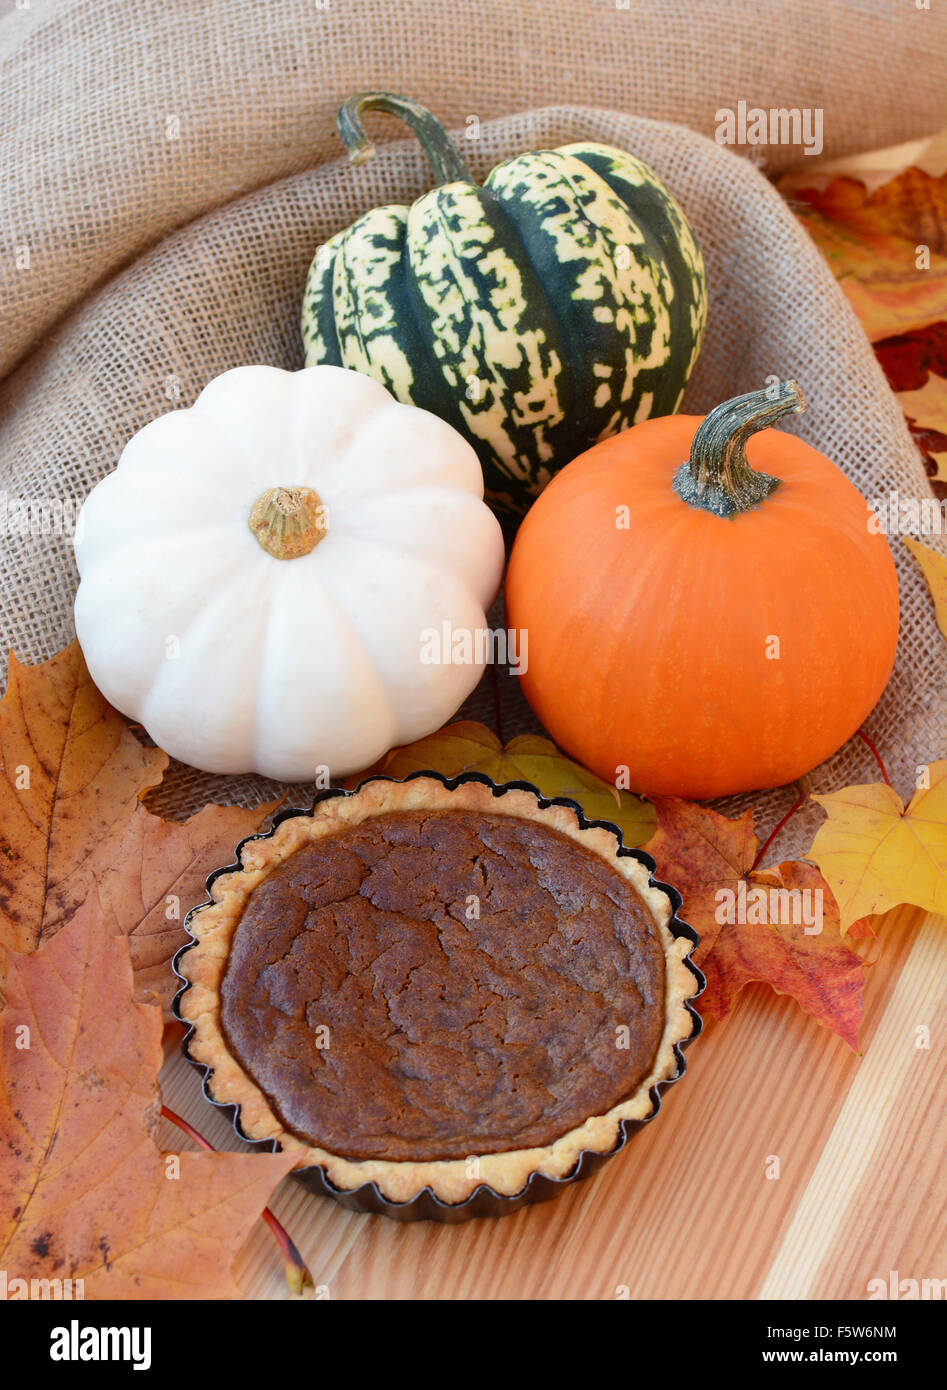 Small pumpkin pie with autumn leaves and gourds amongst burlap fabric Stock Photo